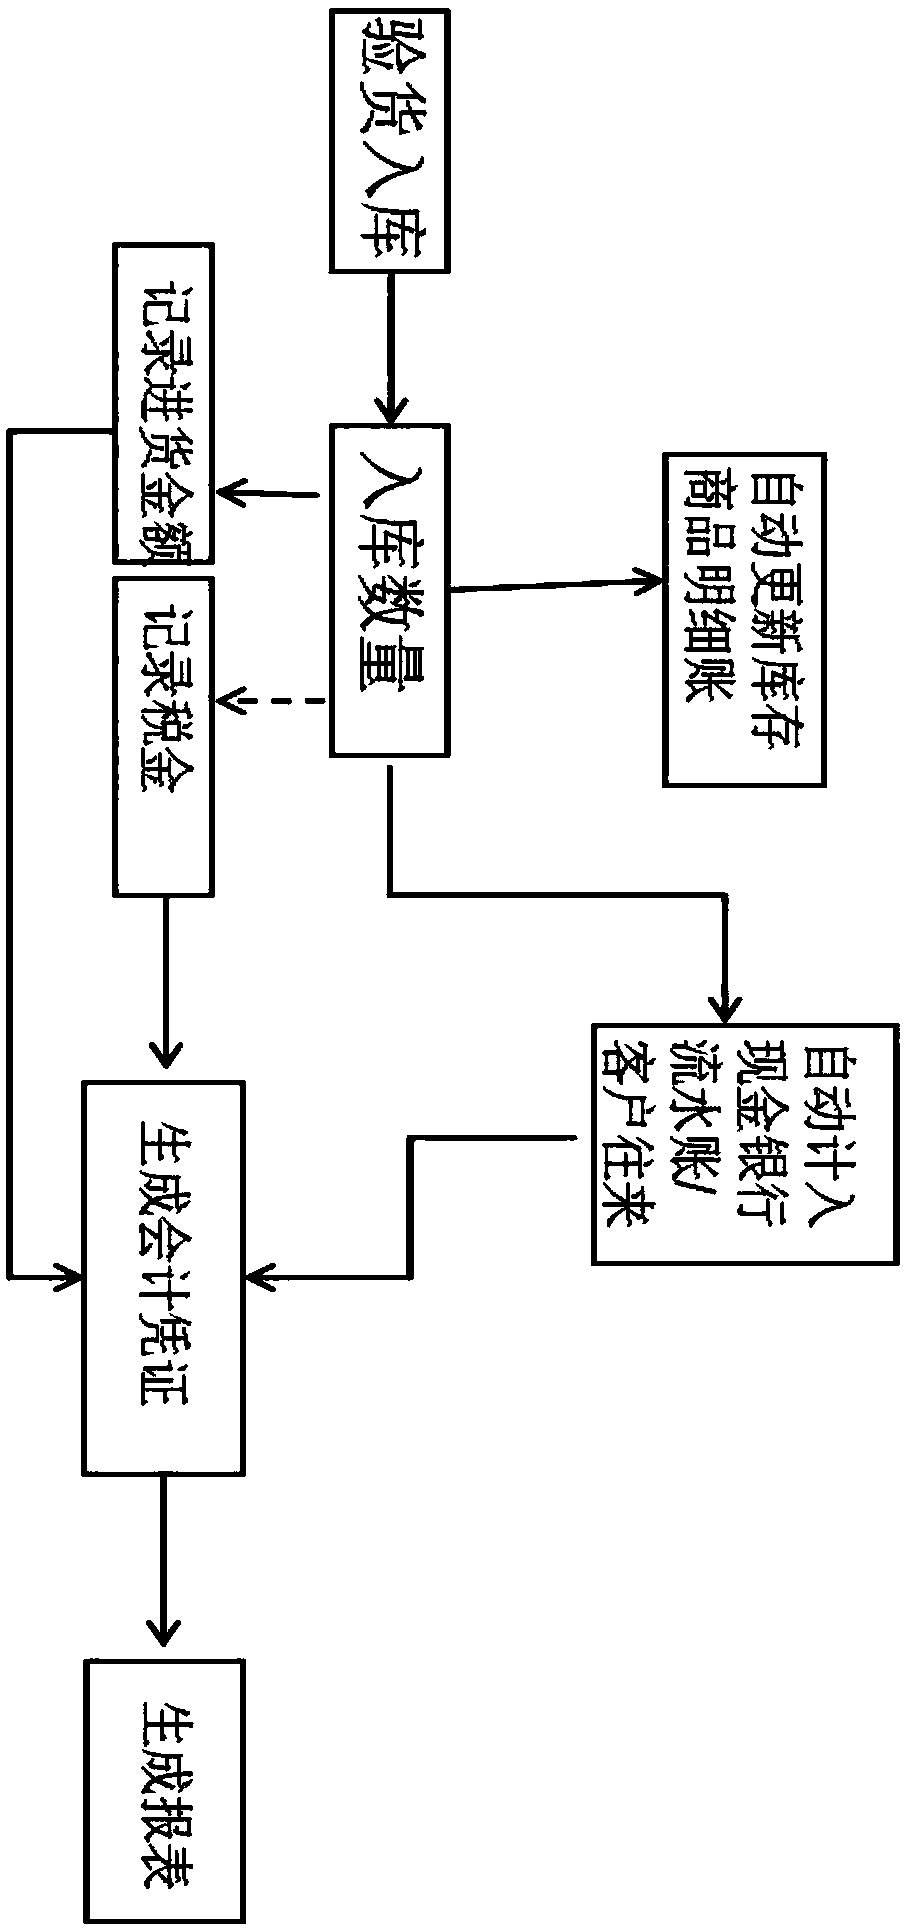 Financial automation system and method based on business economic service process